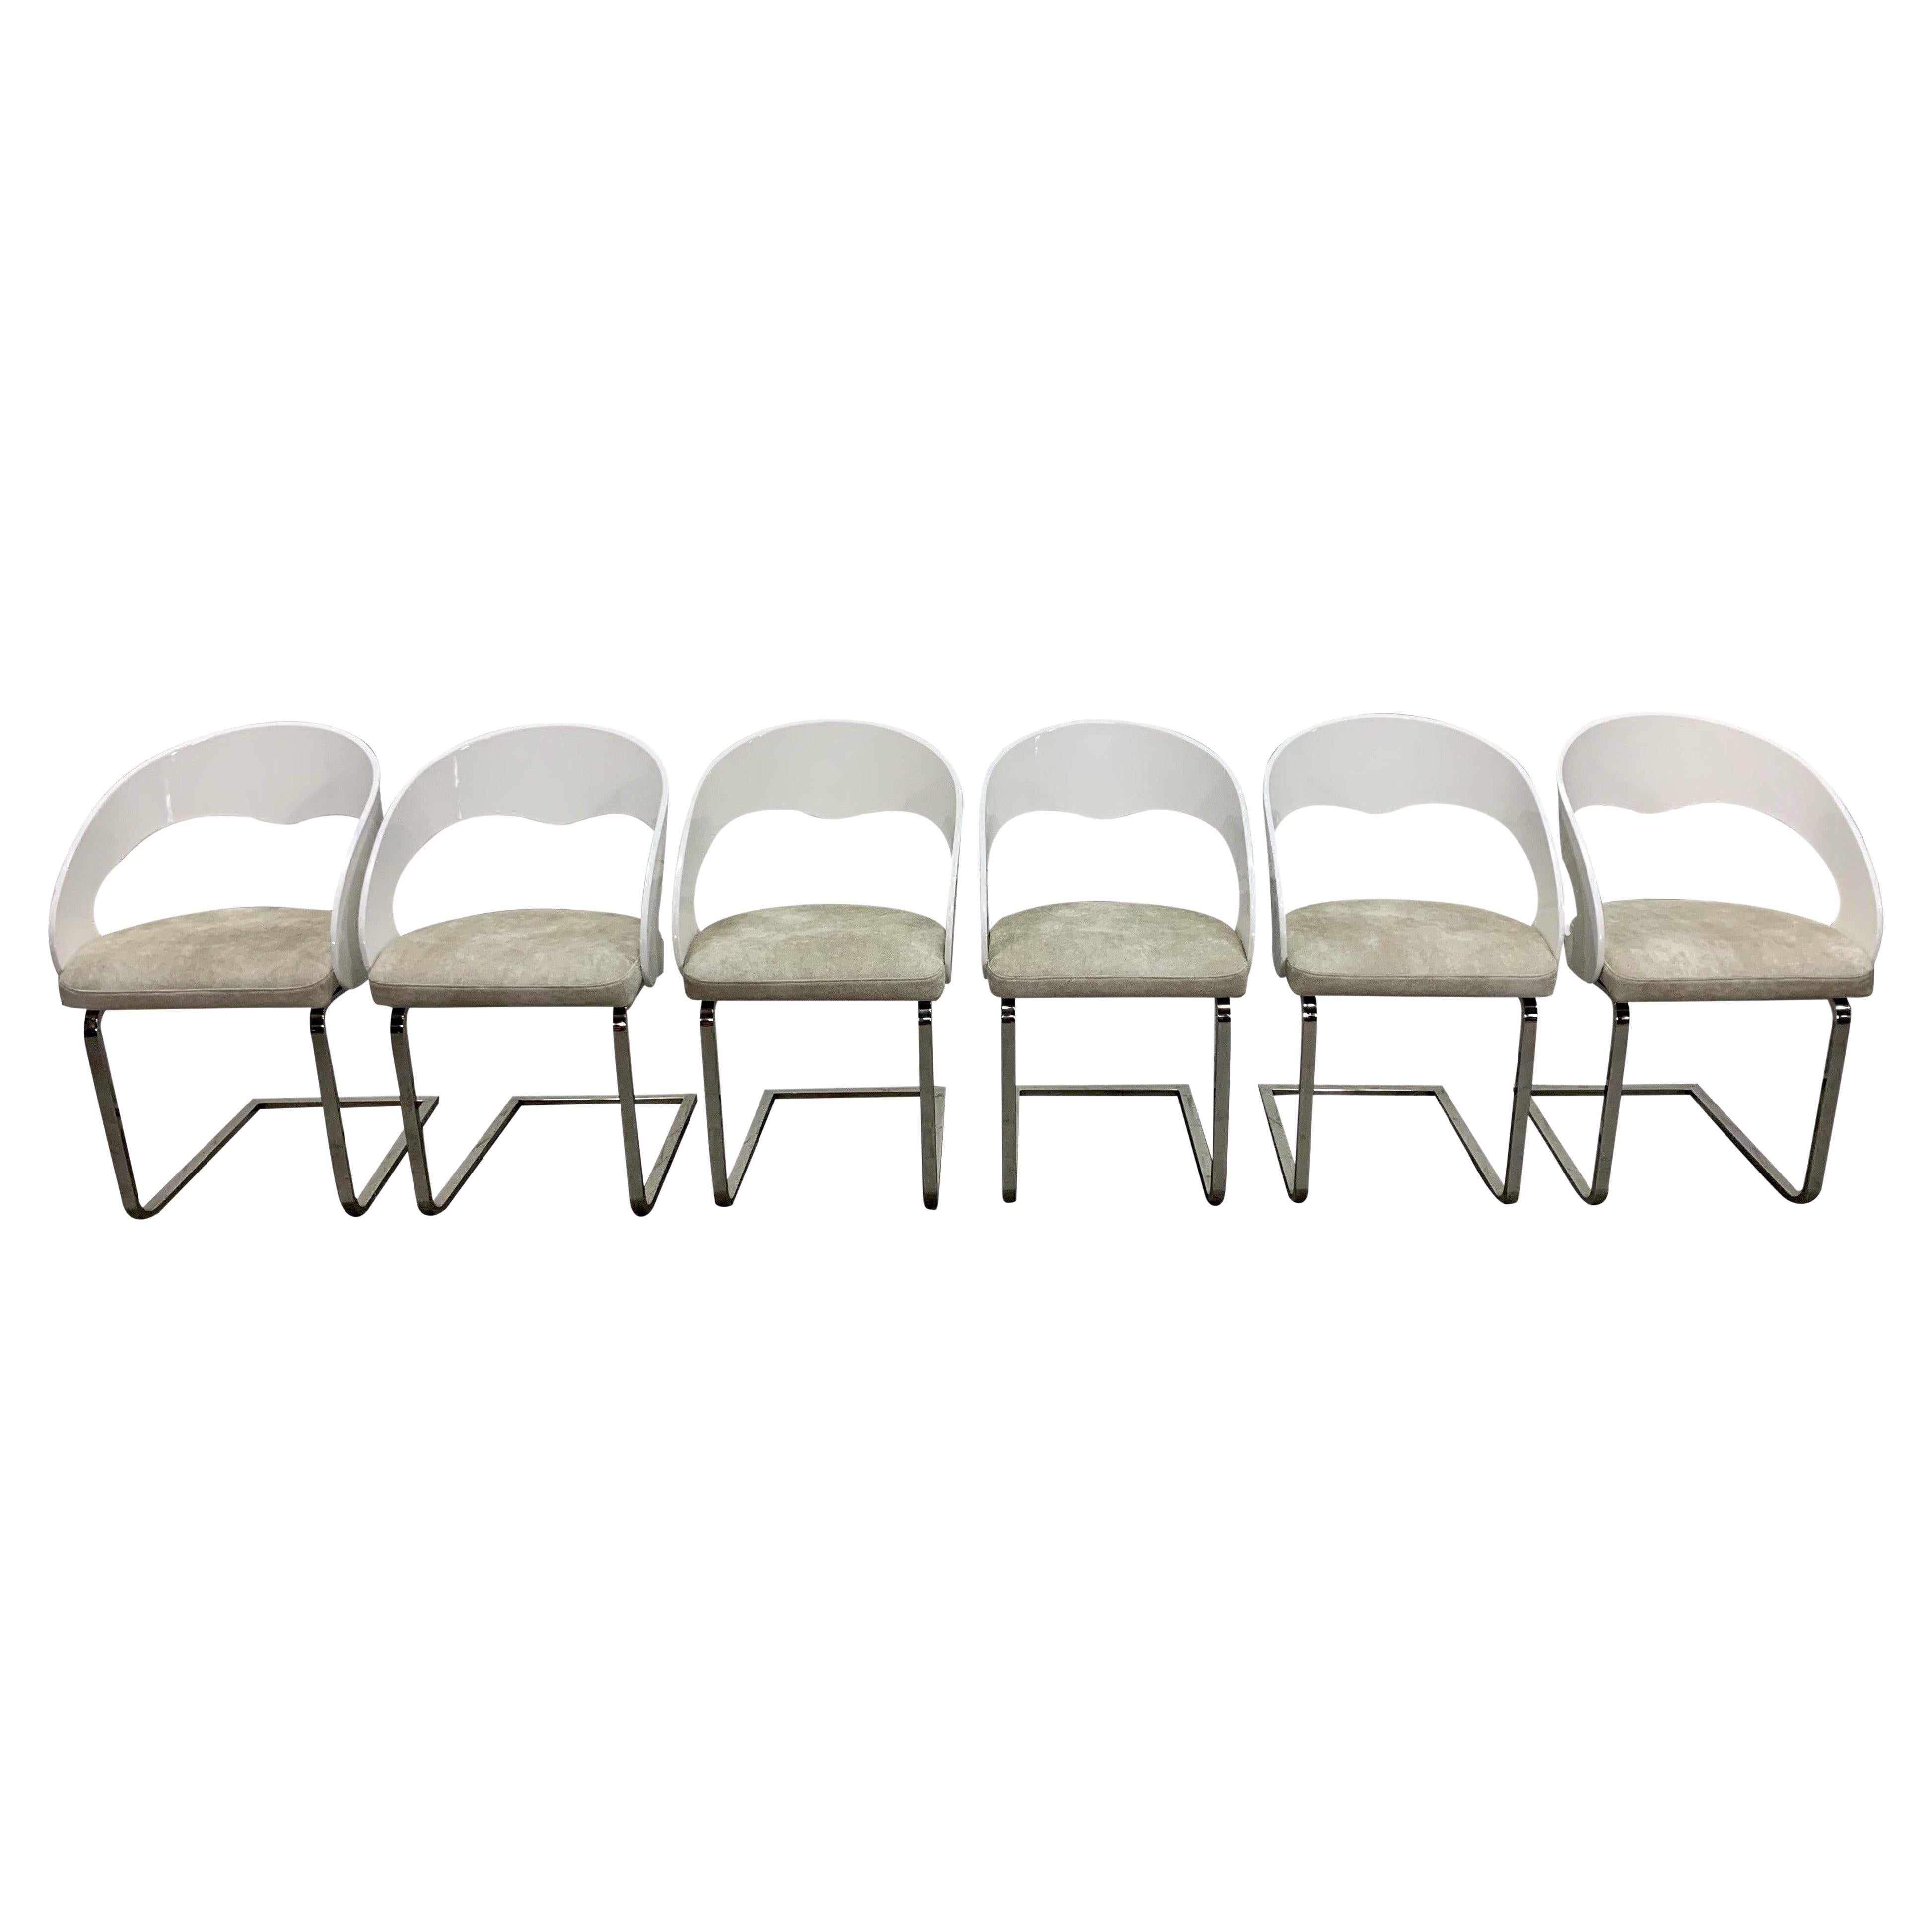 Eero Saarinen Styled Contemporary Dining Chairs - Set of 6 For Sale